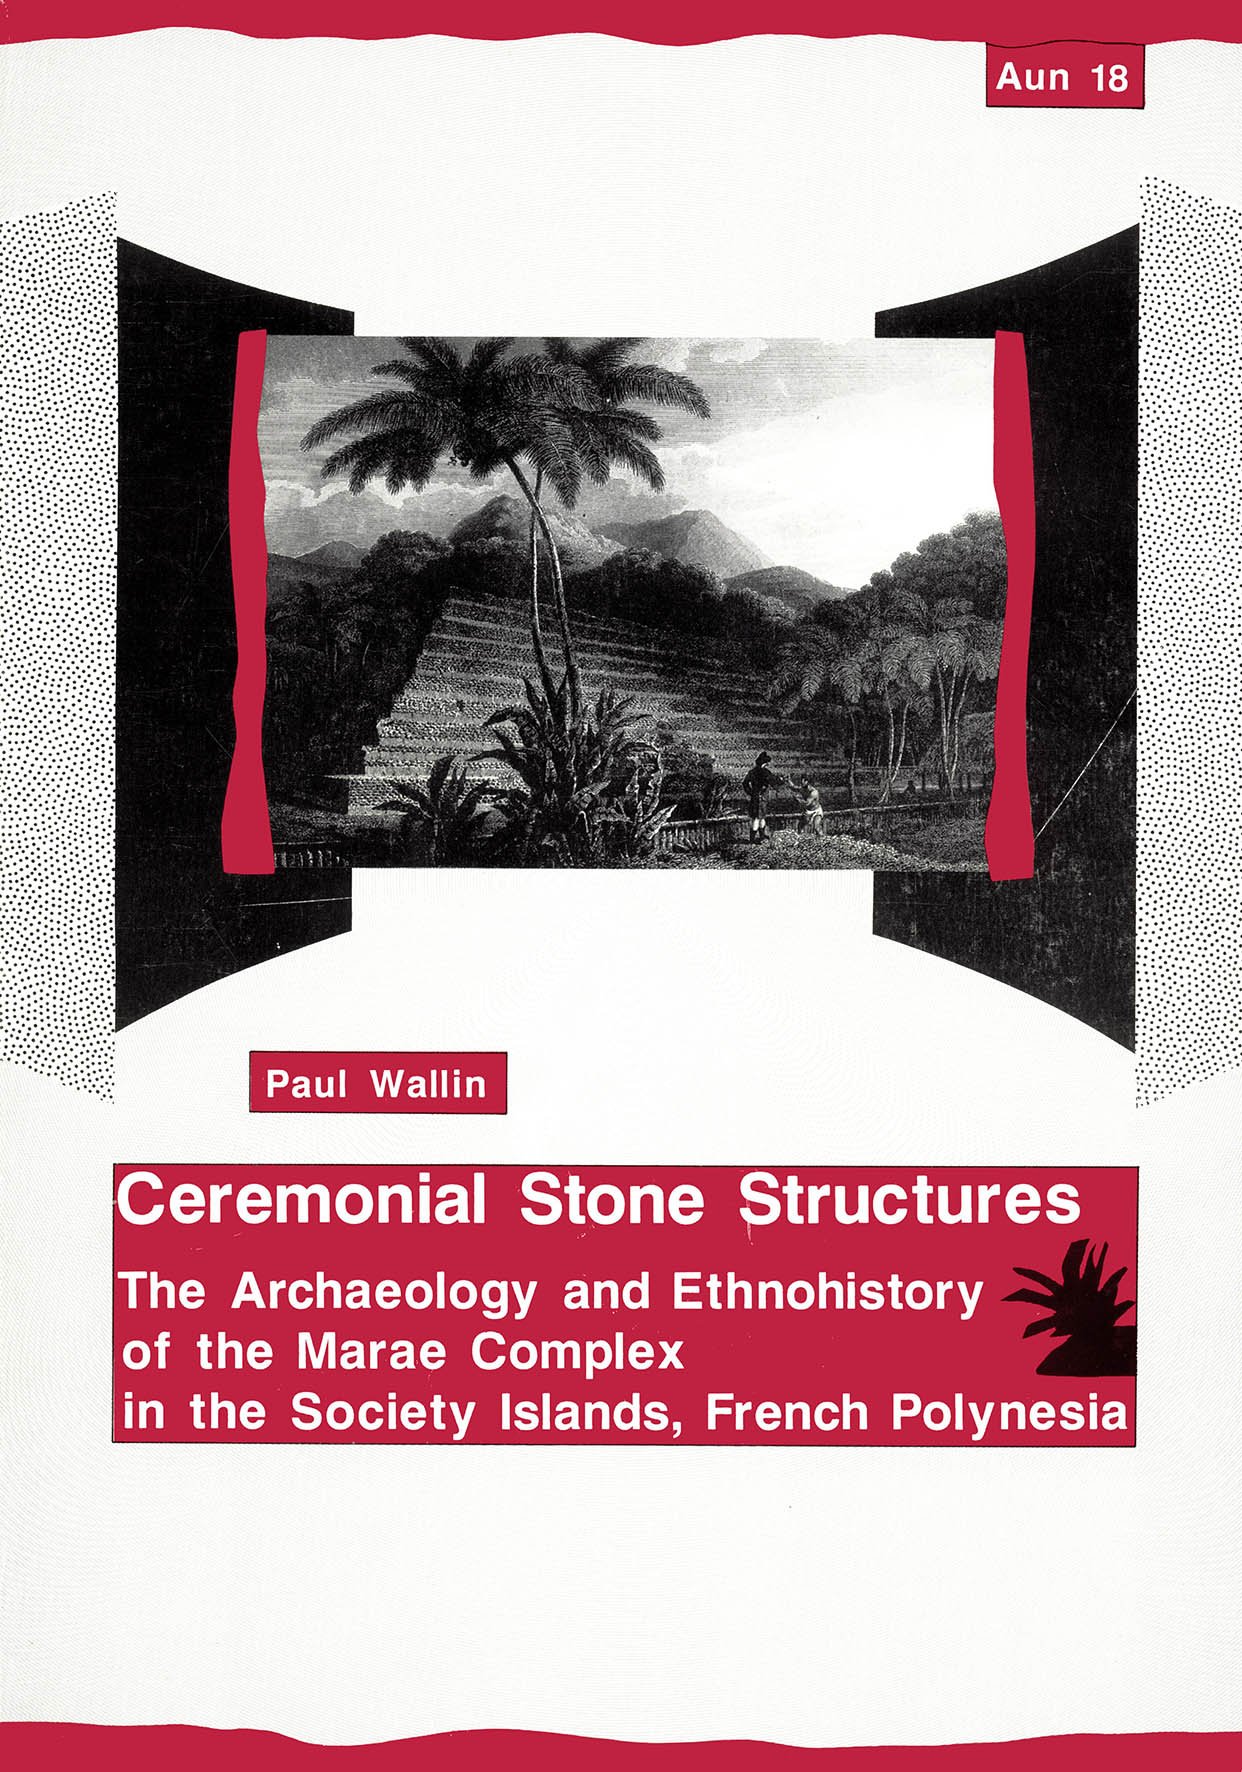 Ceremonial Stone Structures.